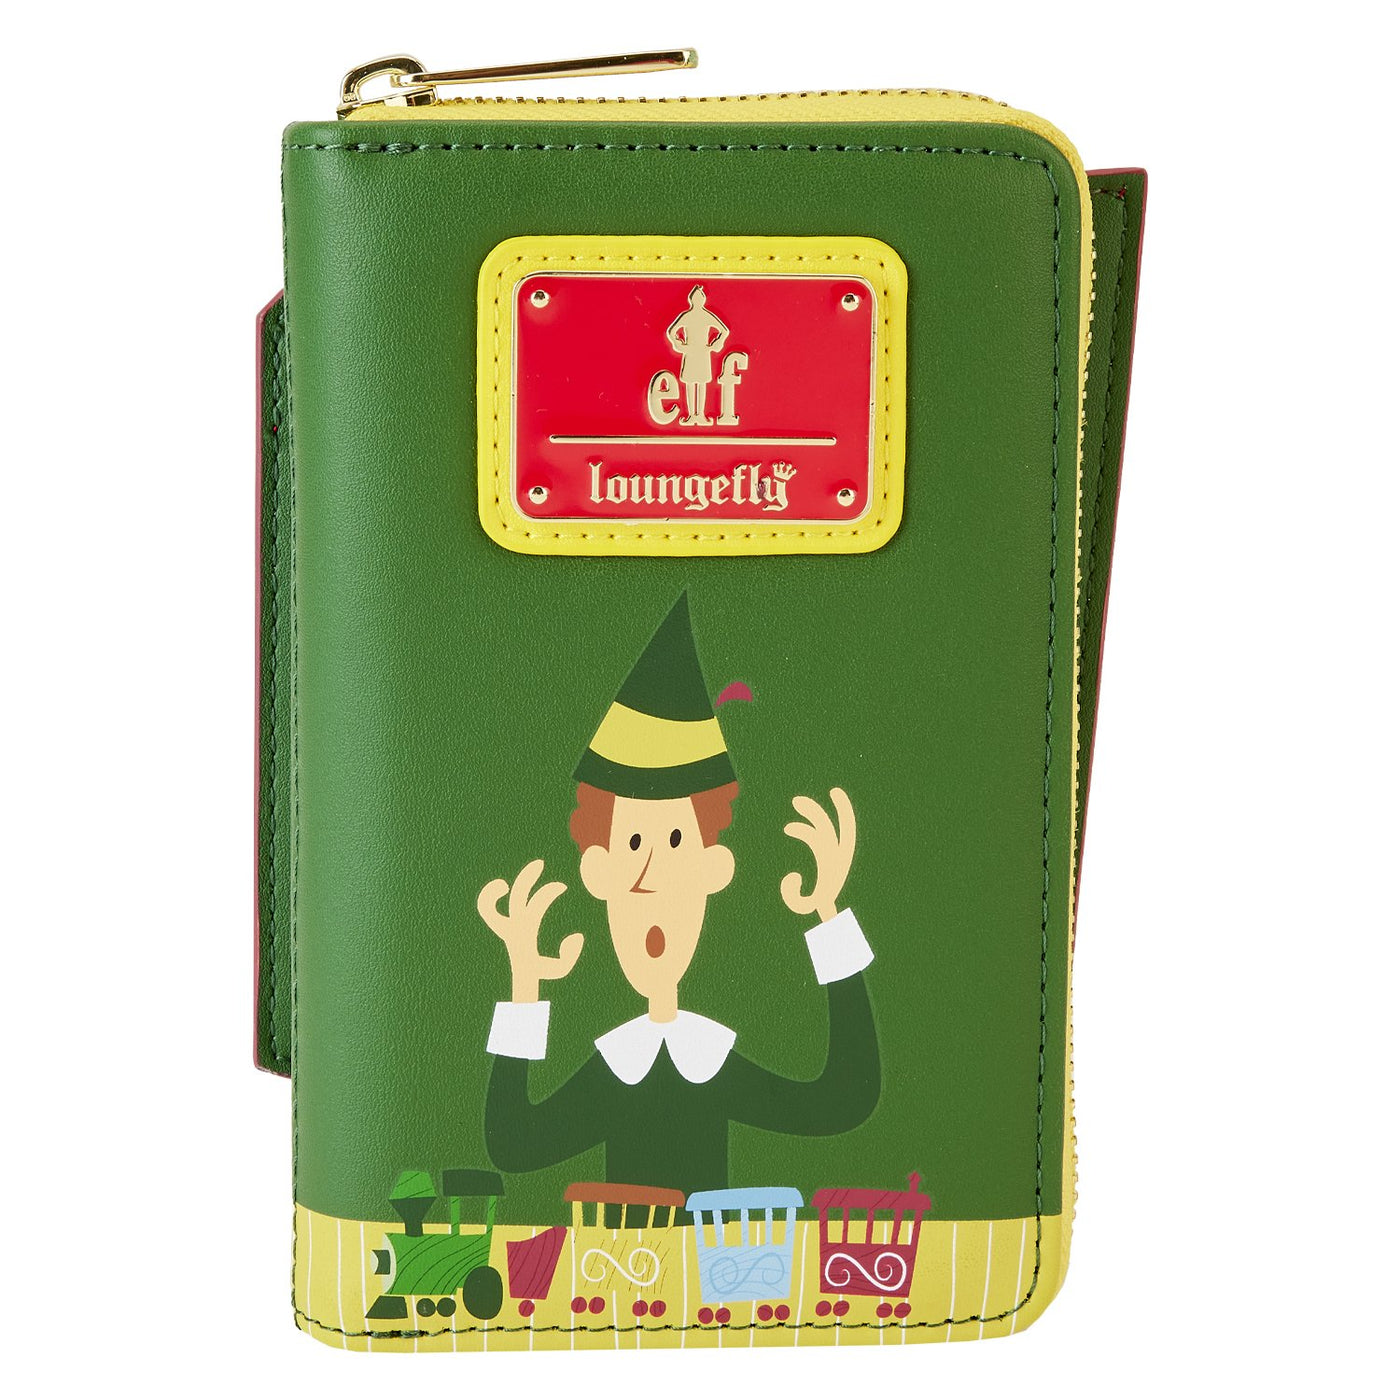 Loungefly Warner Brothers Elf 20th Anniversary Cosplay Zip-Around Wallet - Back